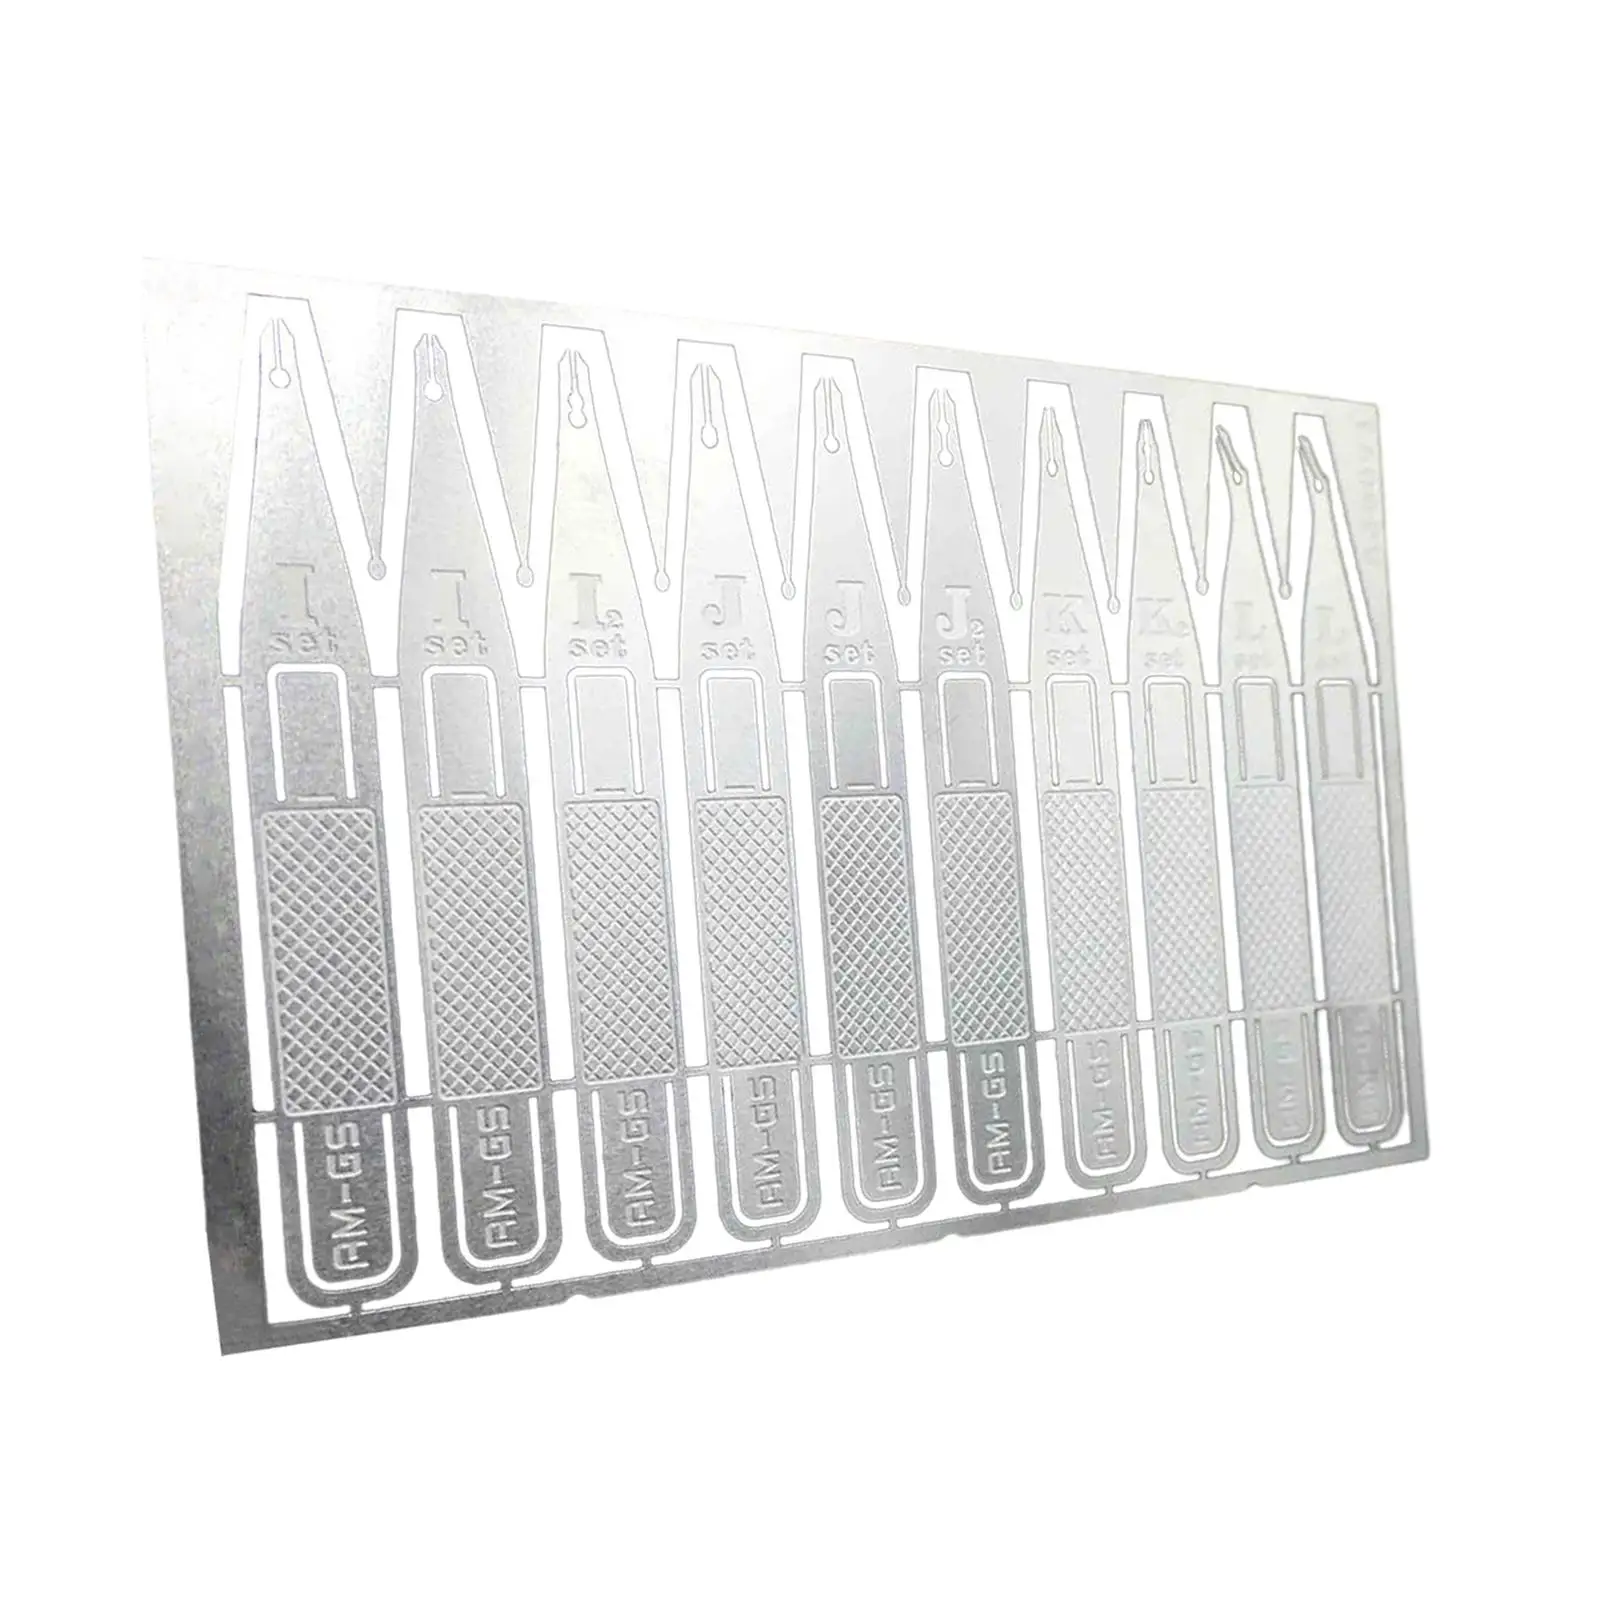 Precision Glue Micro Tips Adhesive Dispensers Glue Marks Modeling Sticks Precise Bonding Etching Sheet for Crafting Adhesive